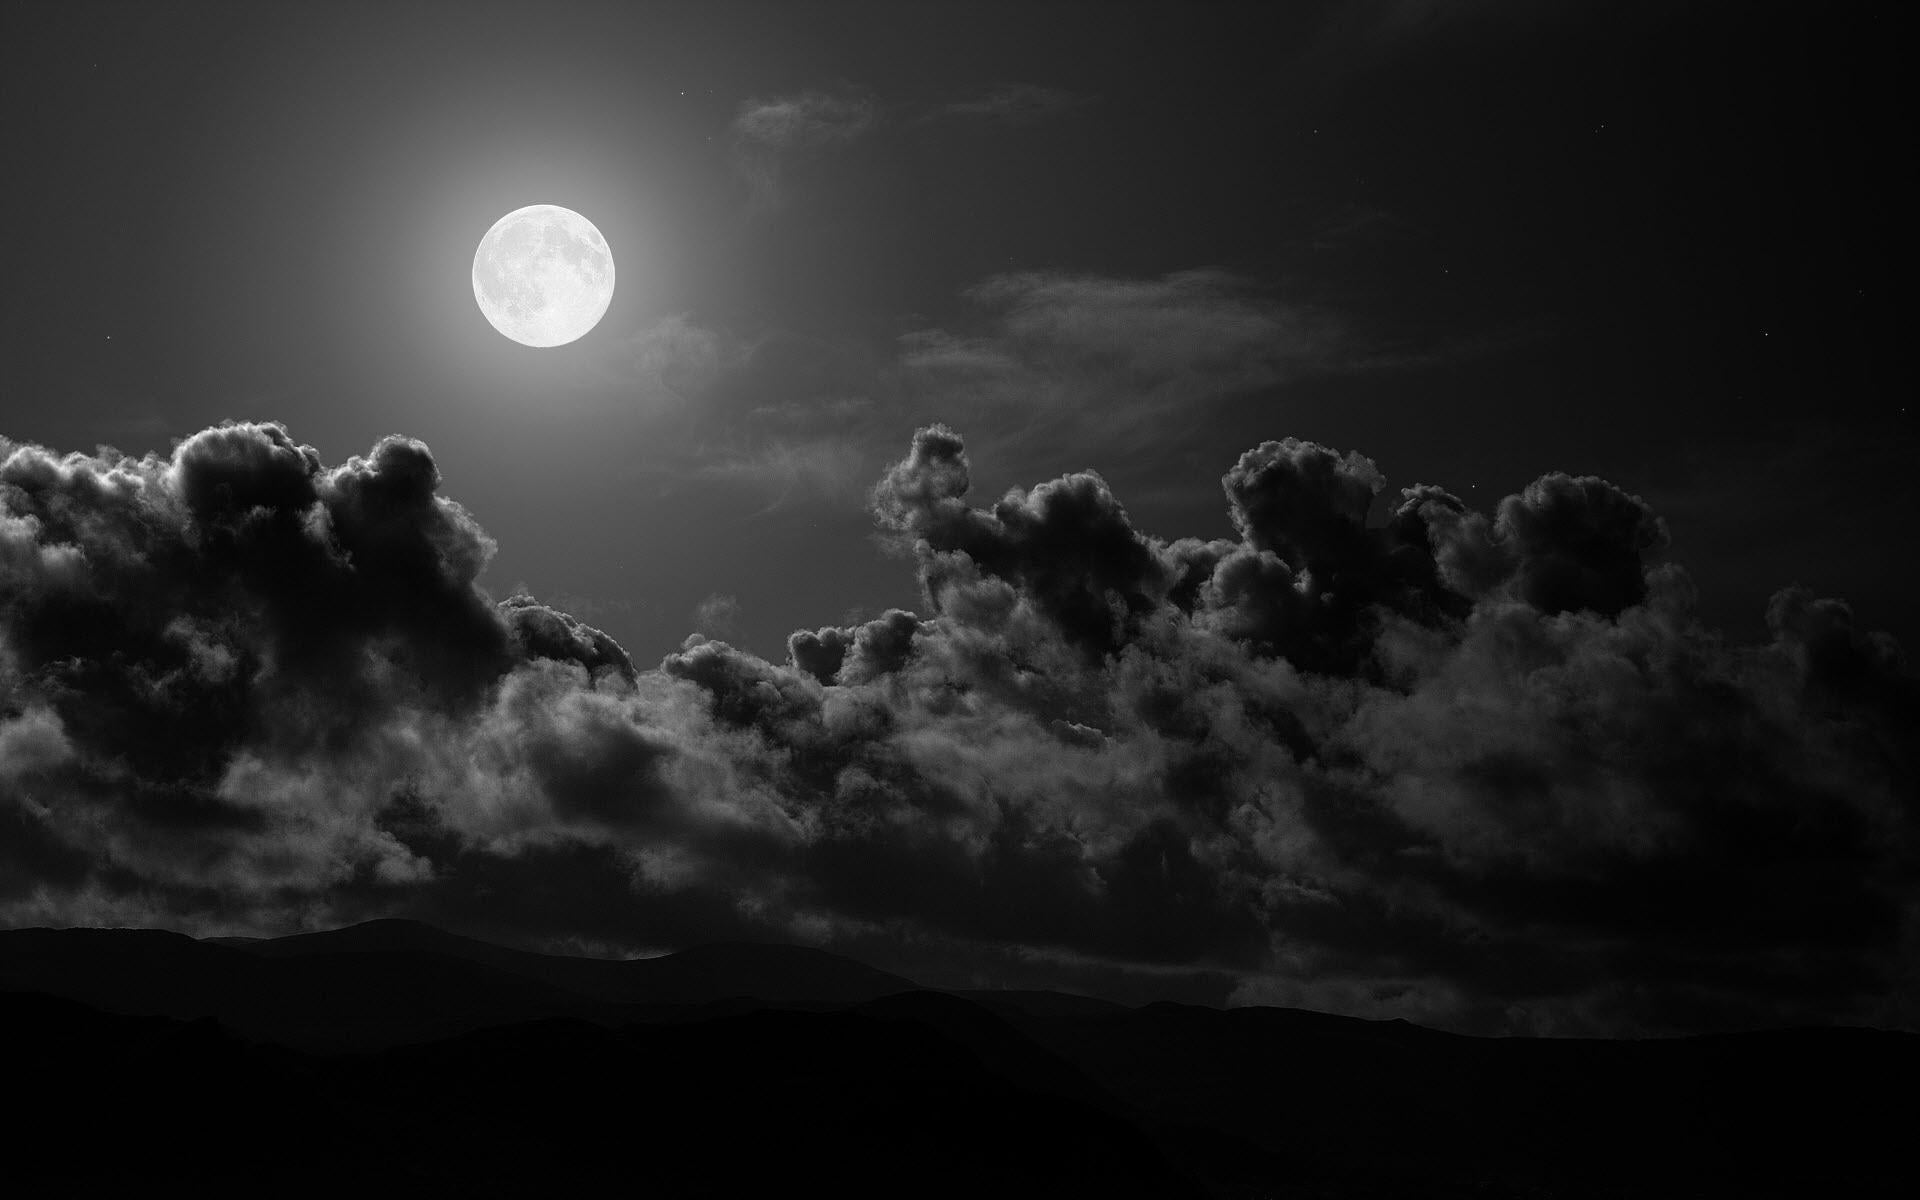 moon and clouds wallpaper, sky, black-and-white, nature, cloud - Sky